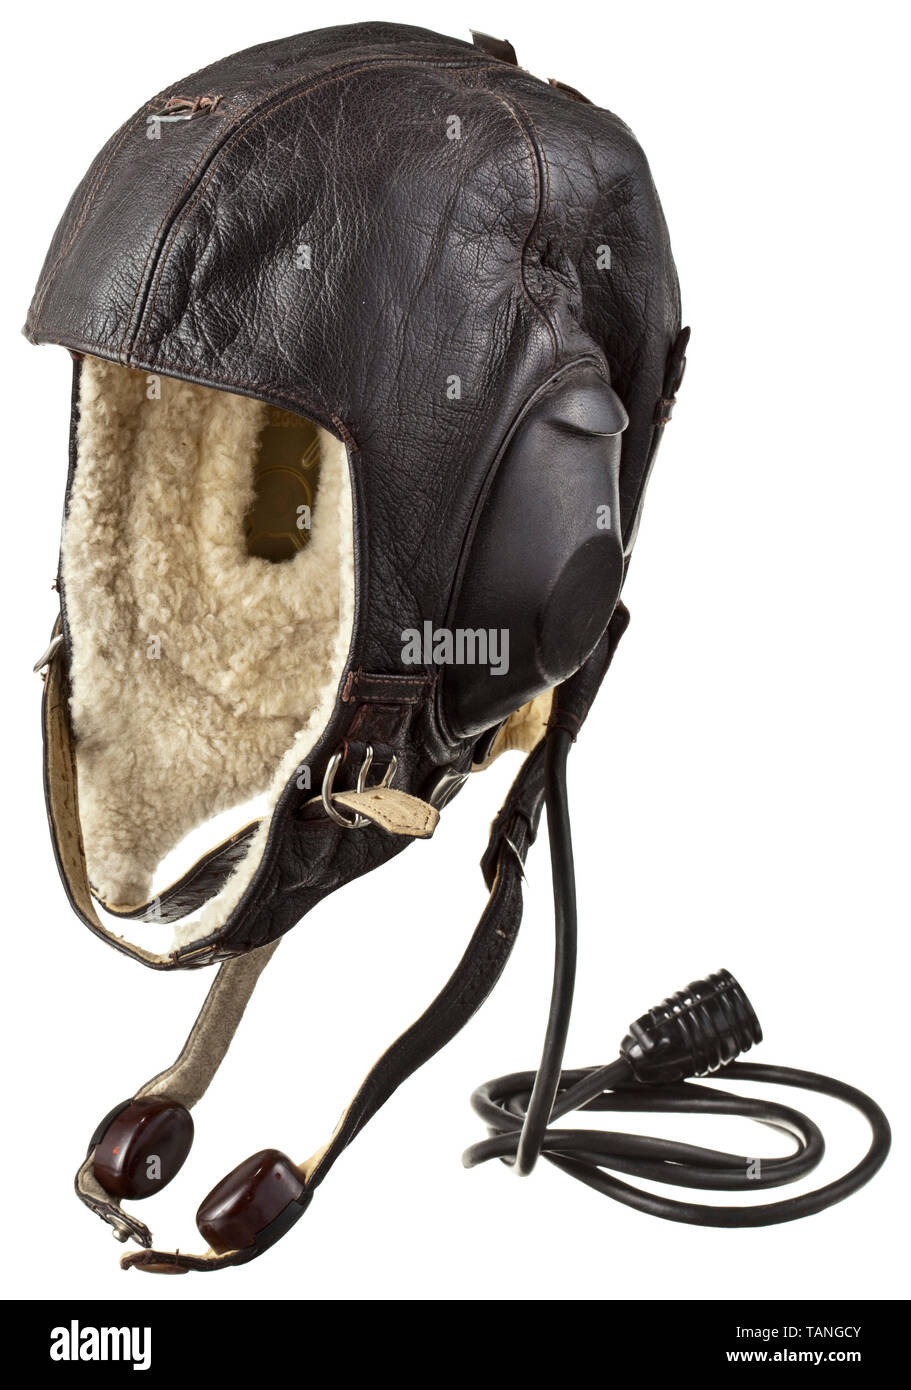 An aviator's winter safety helmet 'LKpW 101' maker 'Siemens Apparate u. Maschinen GmbH' historic, historical, Air Force, branch of service, branches of service, armed service, armed services, military, militaria, air forces, object, objects, stills, clipping, clippings, cut out, cut-out, cut-outs, 20th century, Editorial-Use-Only Stock Photo